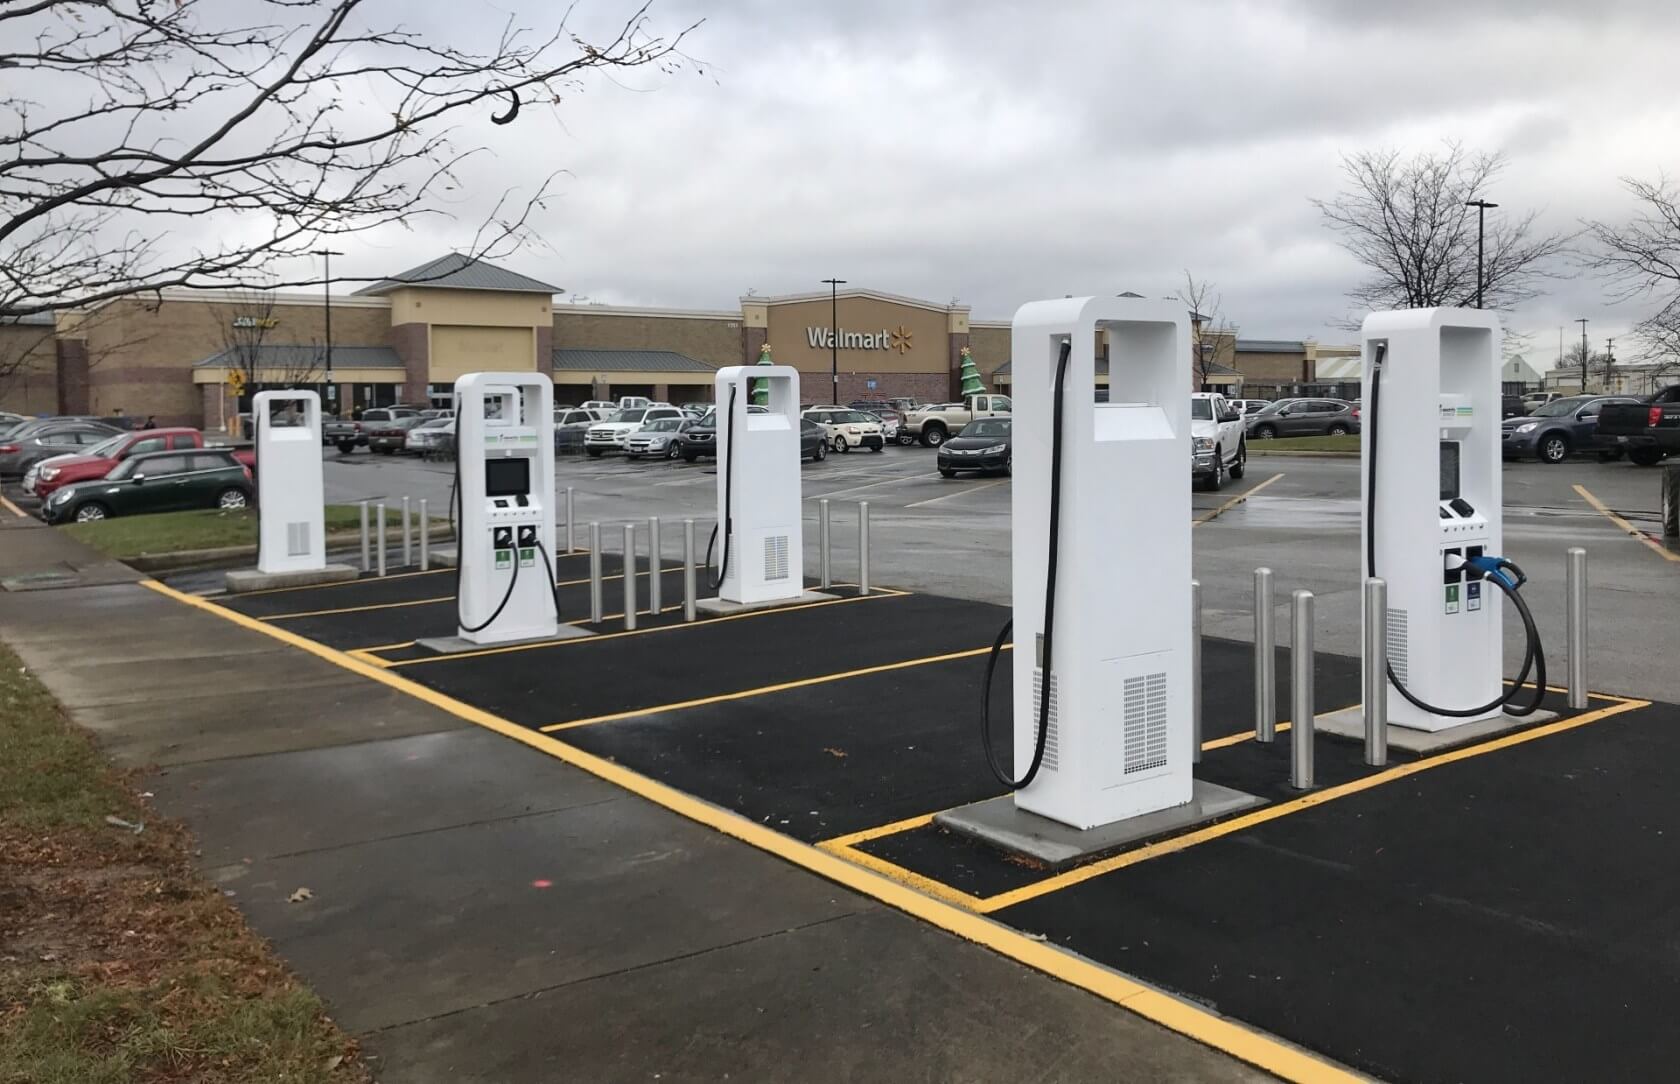 Electrify America has deployed EV charging stations across 120 Walmart locations